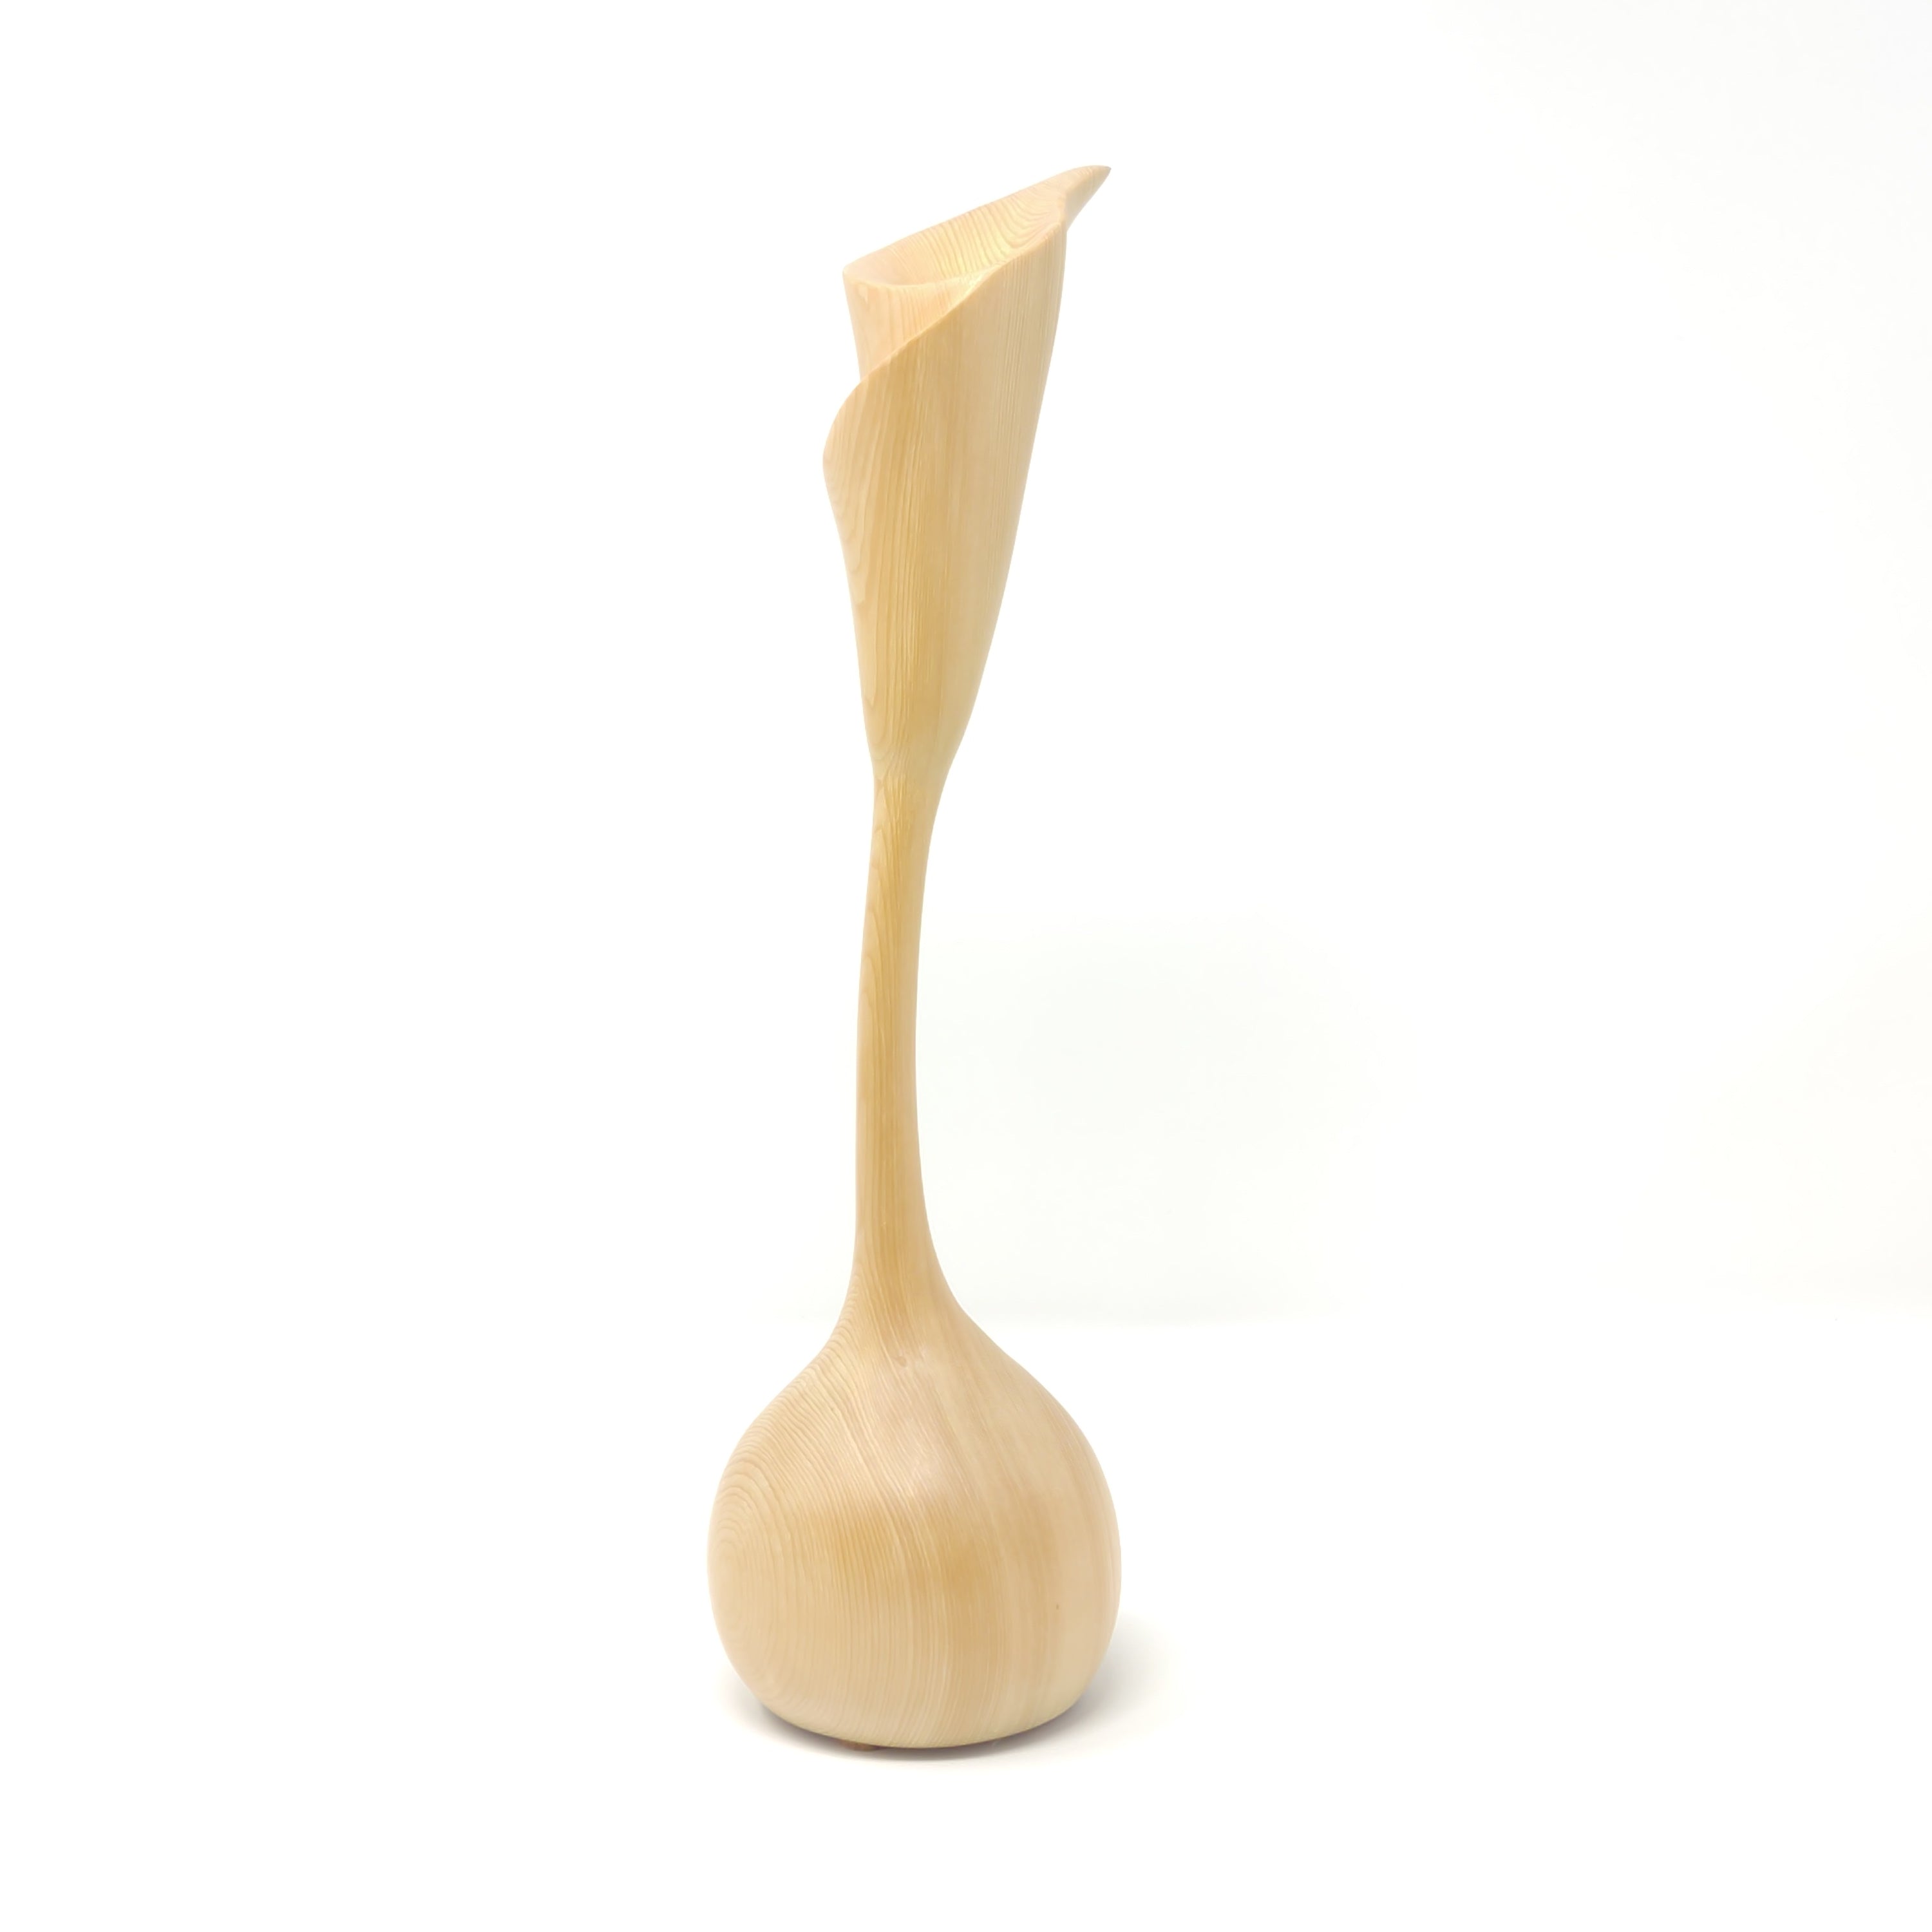 Maple Calla Lily 12 inch by Marceil DeLacy